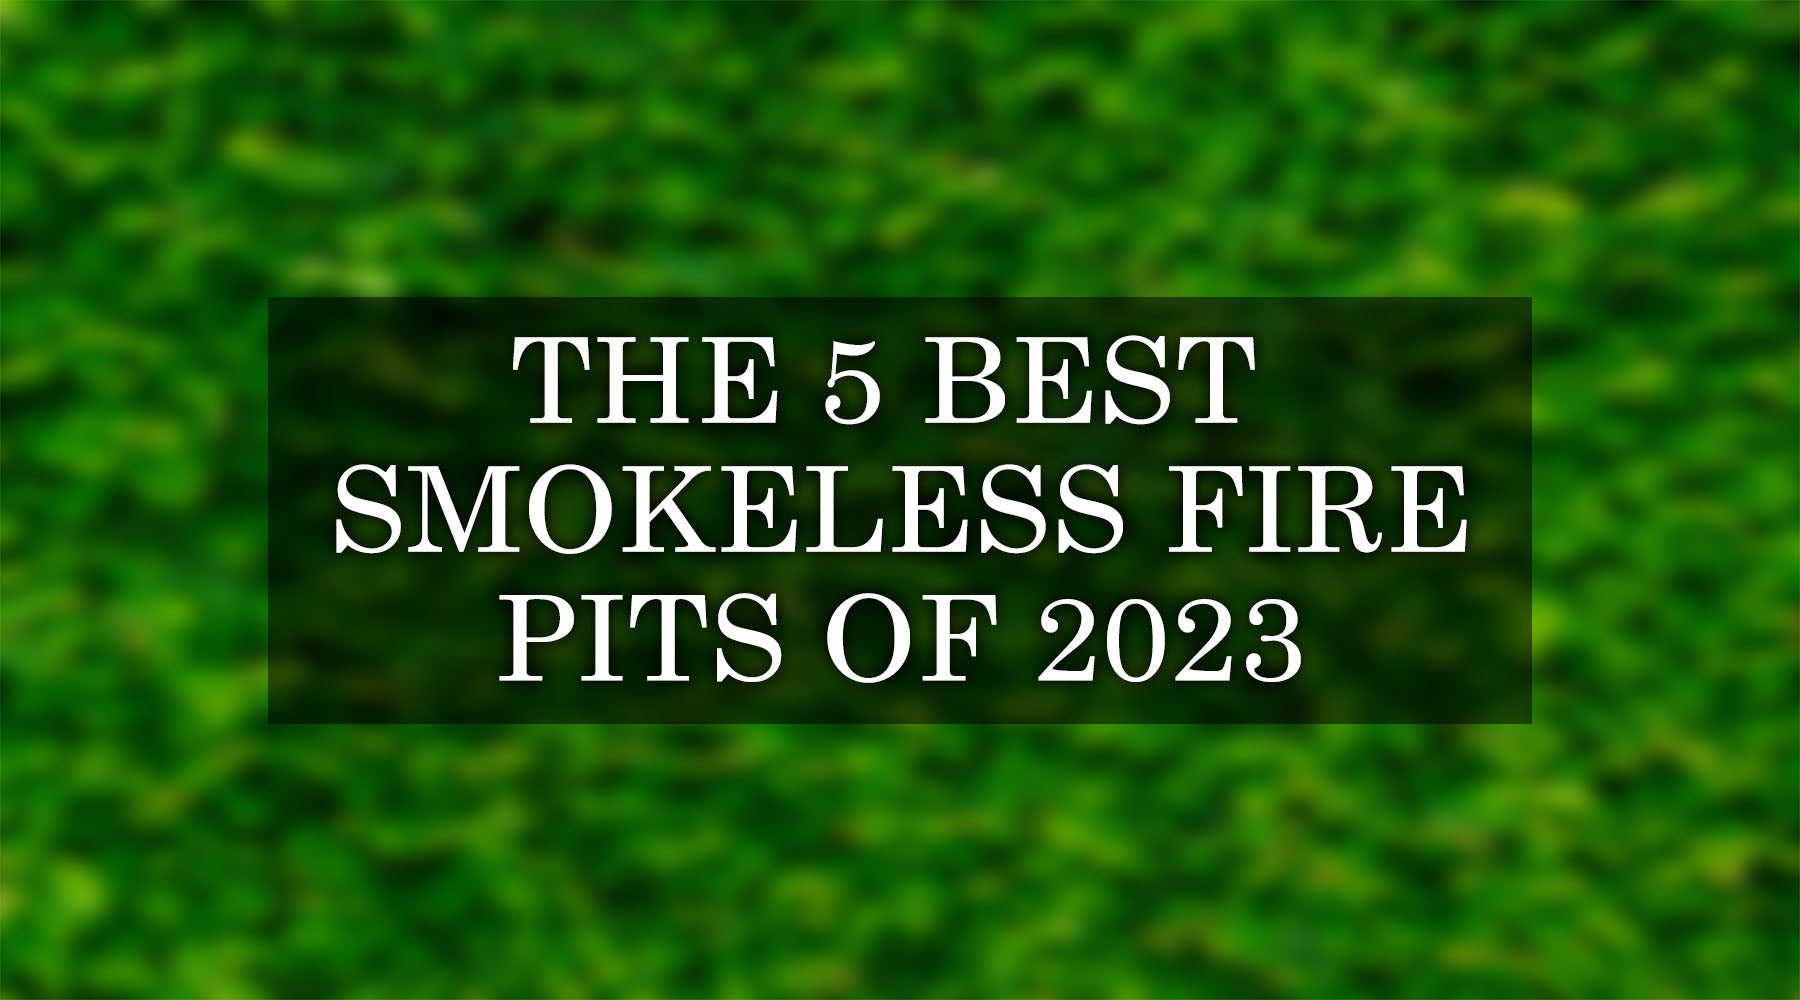 The 5 Best Smokeless Fire Pits of 2023